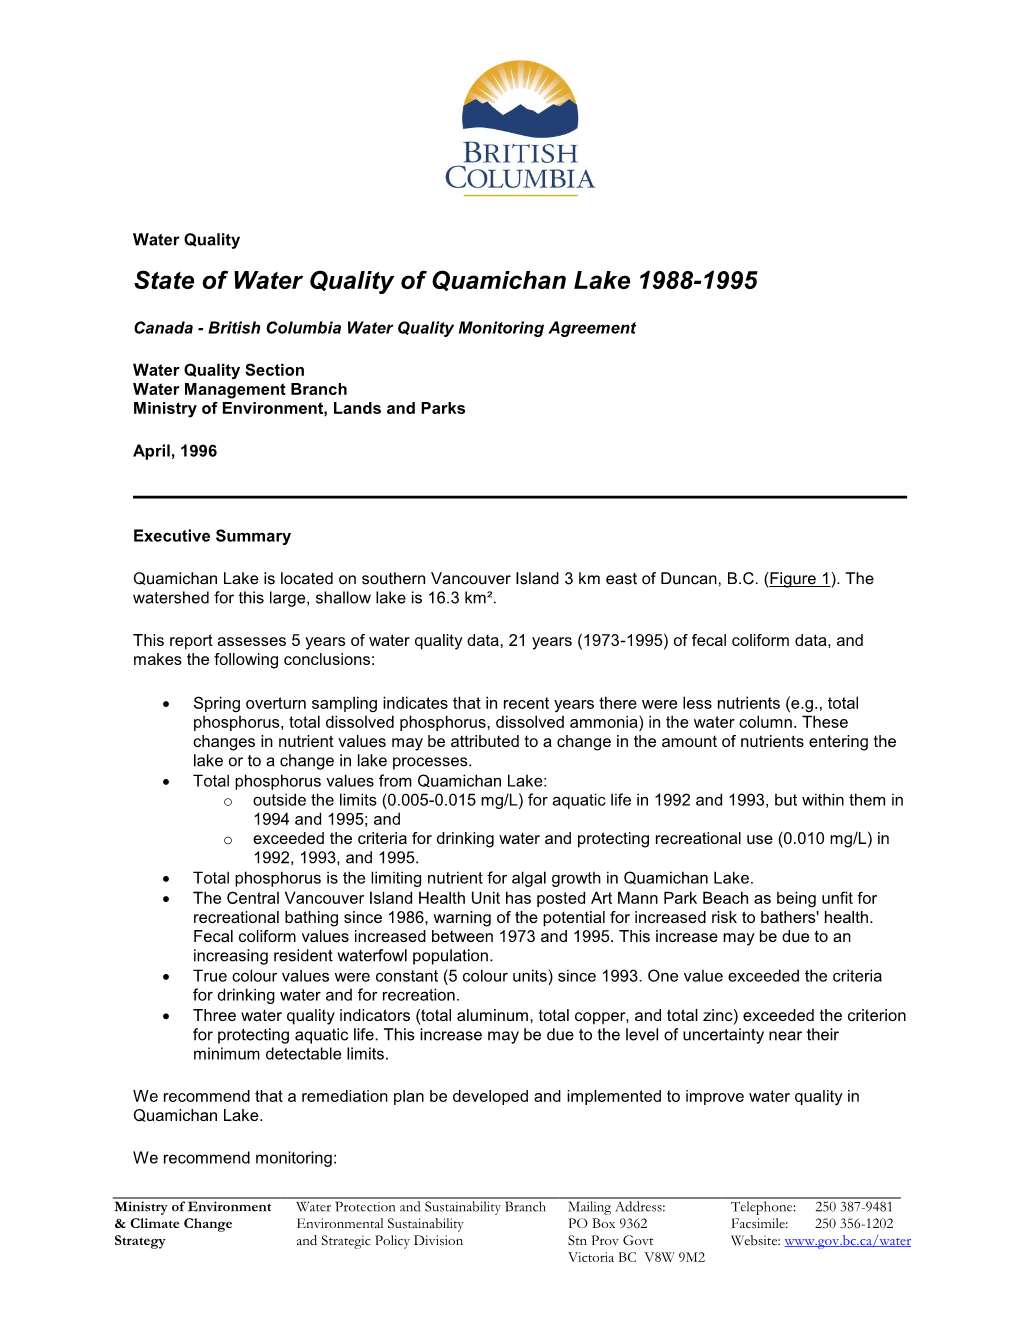 State of Water Quality of Quamichan Lake 1988-1995